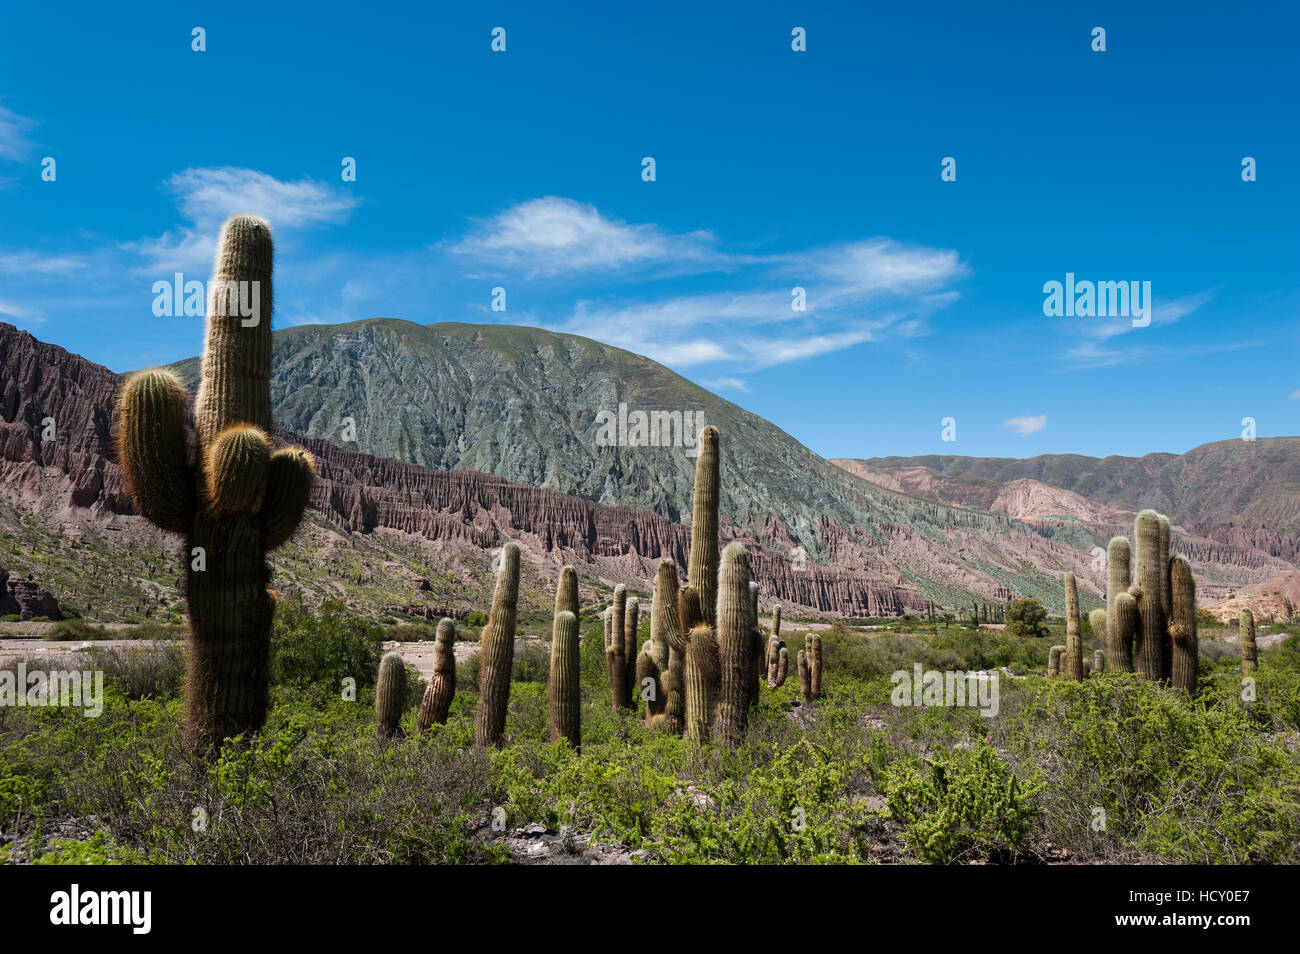 Towering cactus in the tortured Jujuy landscape, Argentina Stock Photo